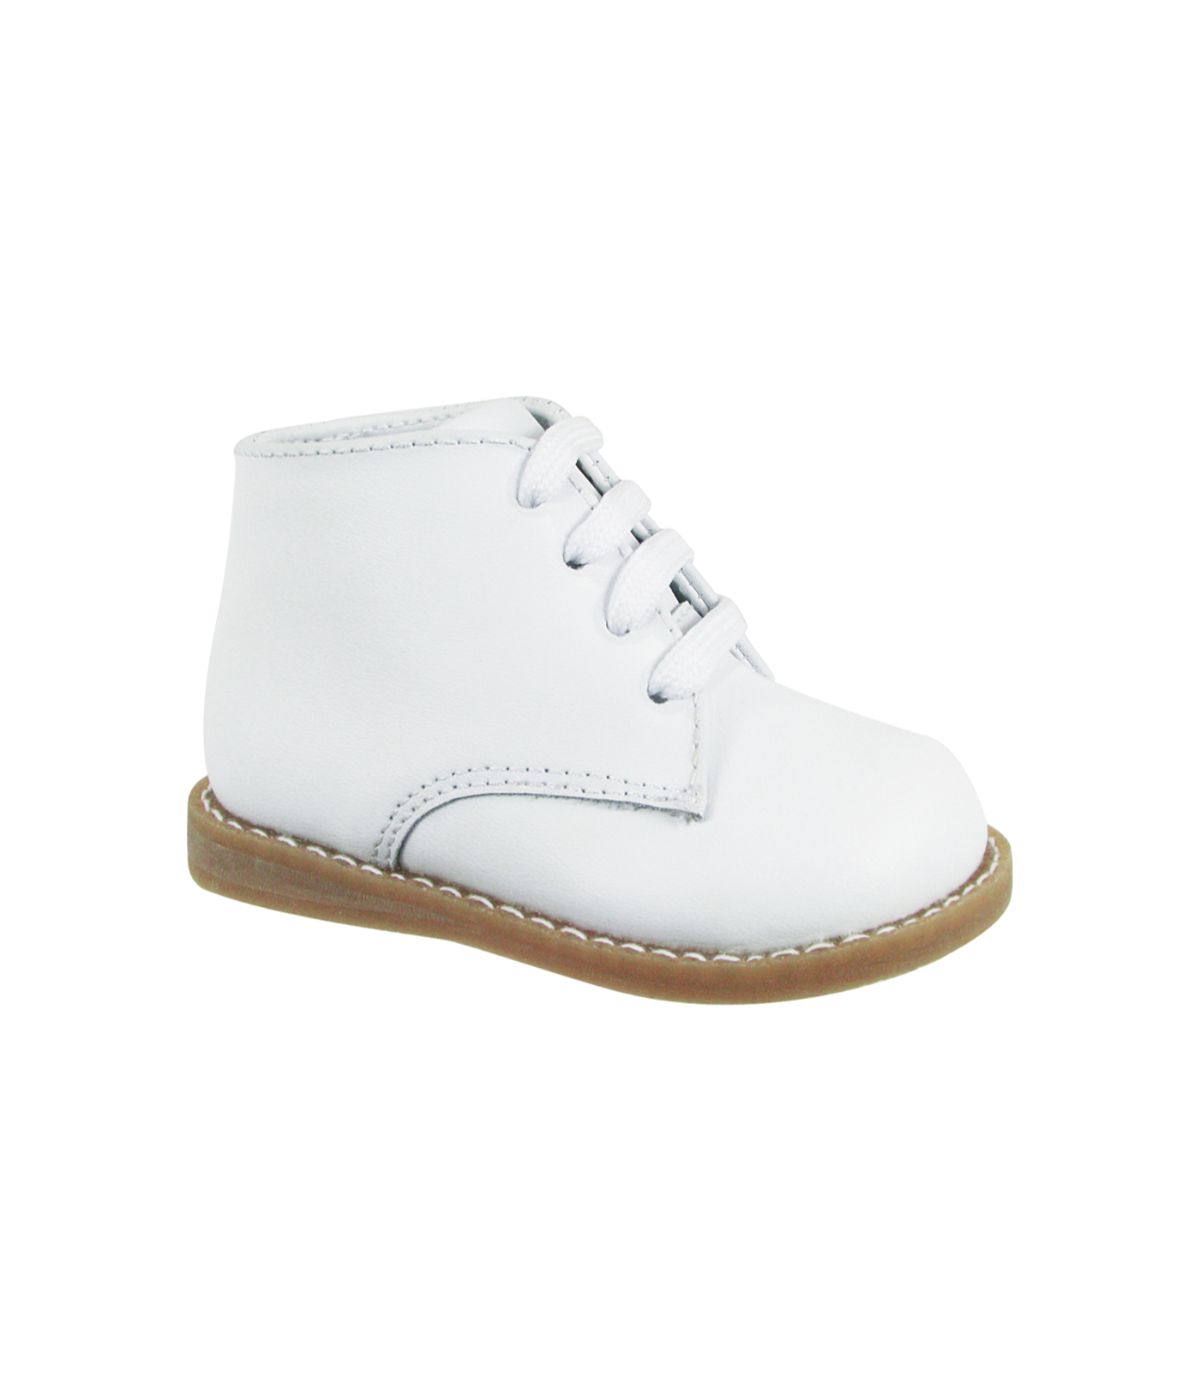 Toddler White Leather Ankle Bootie